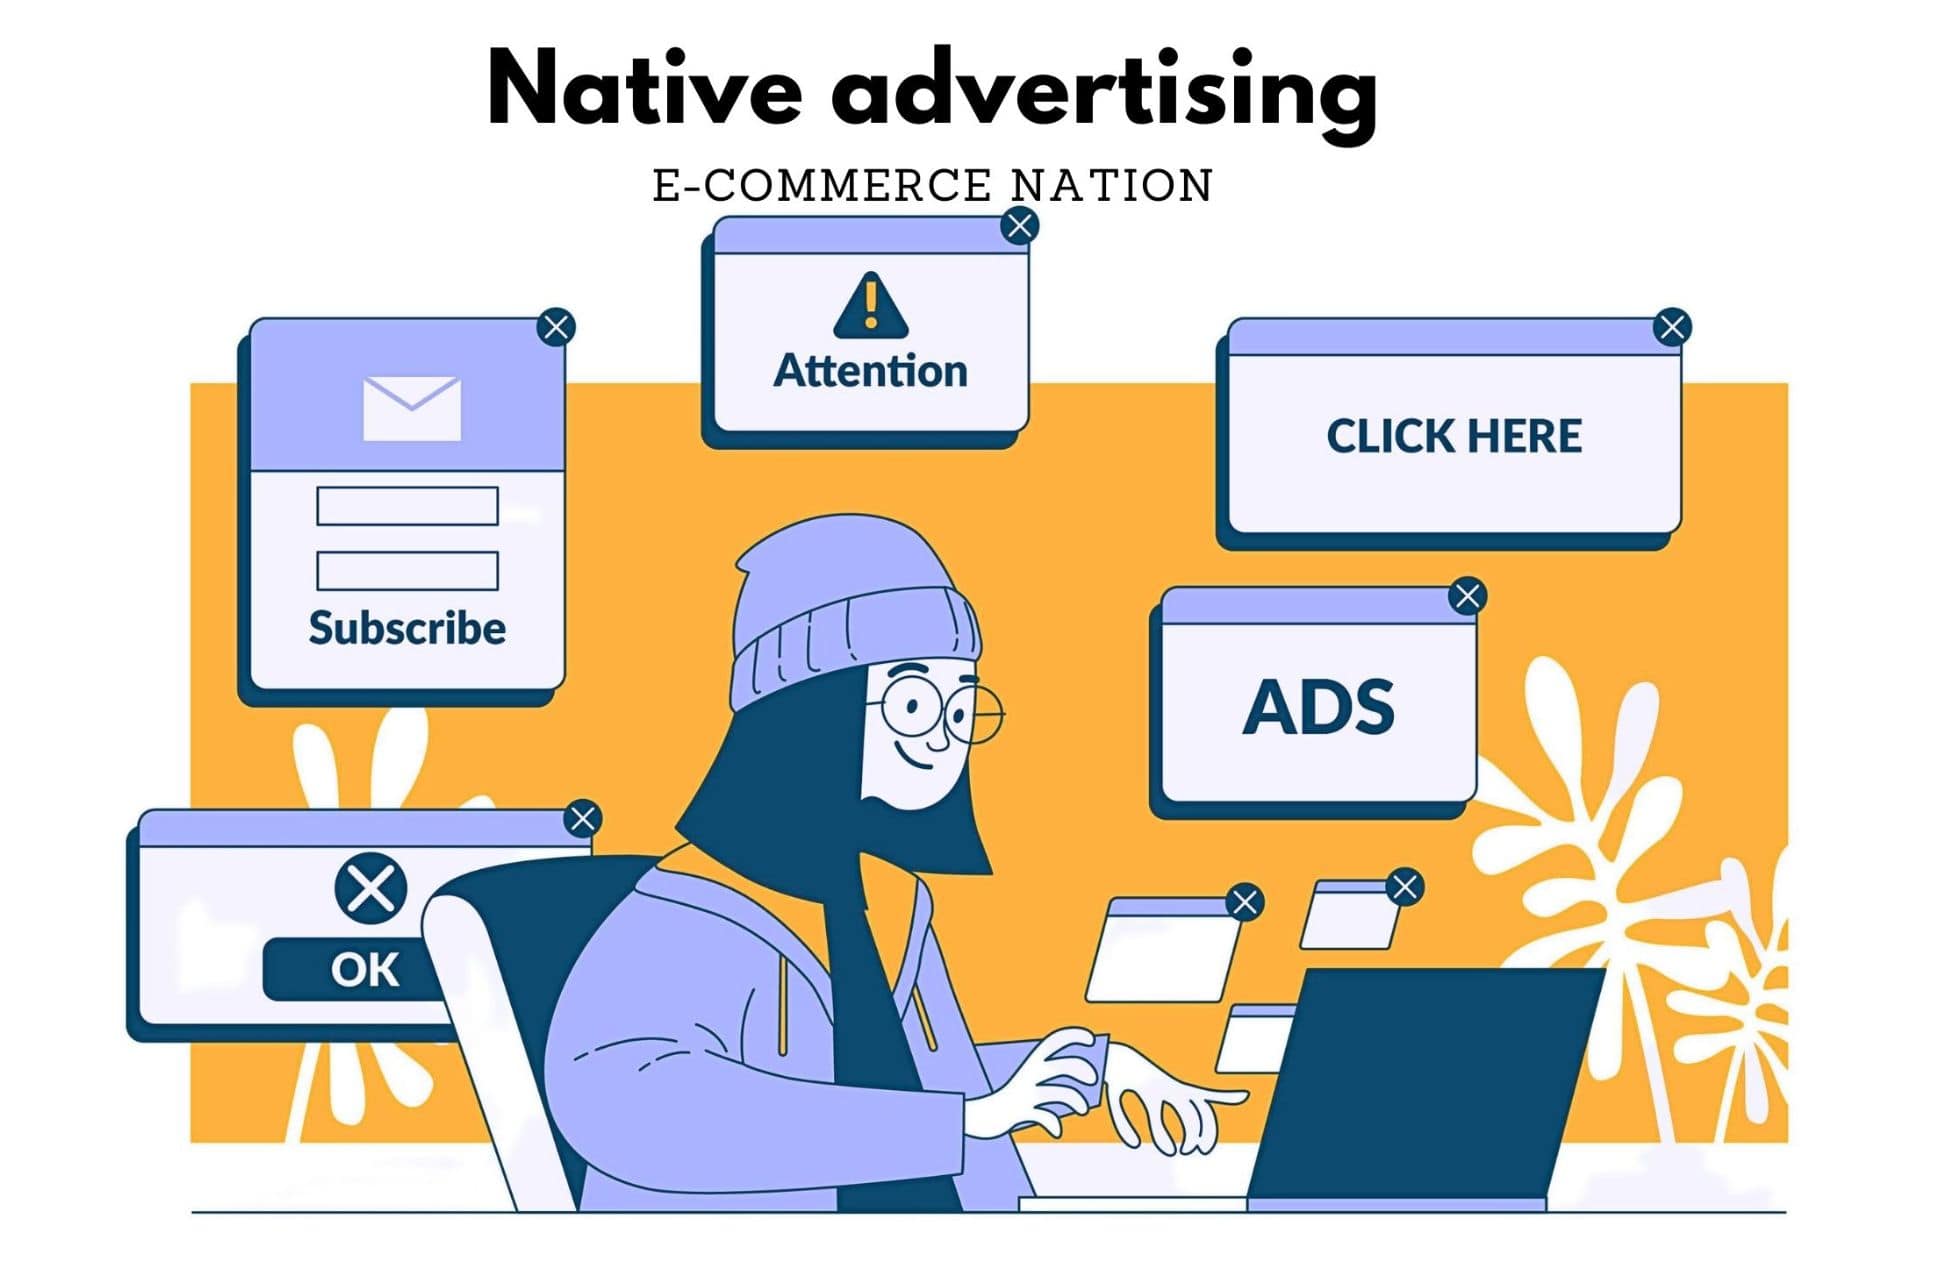 Must-know facts before running your Native advertising (examples and  benefits)